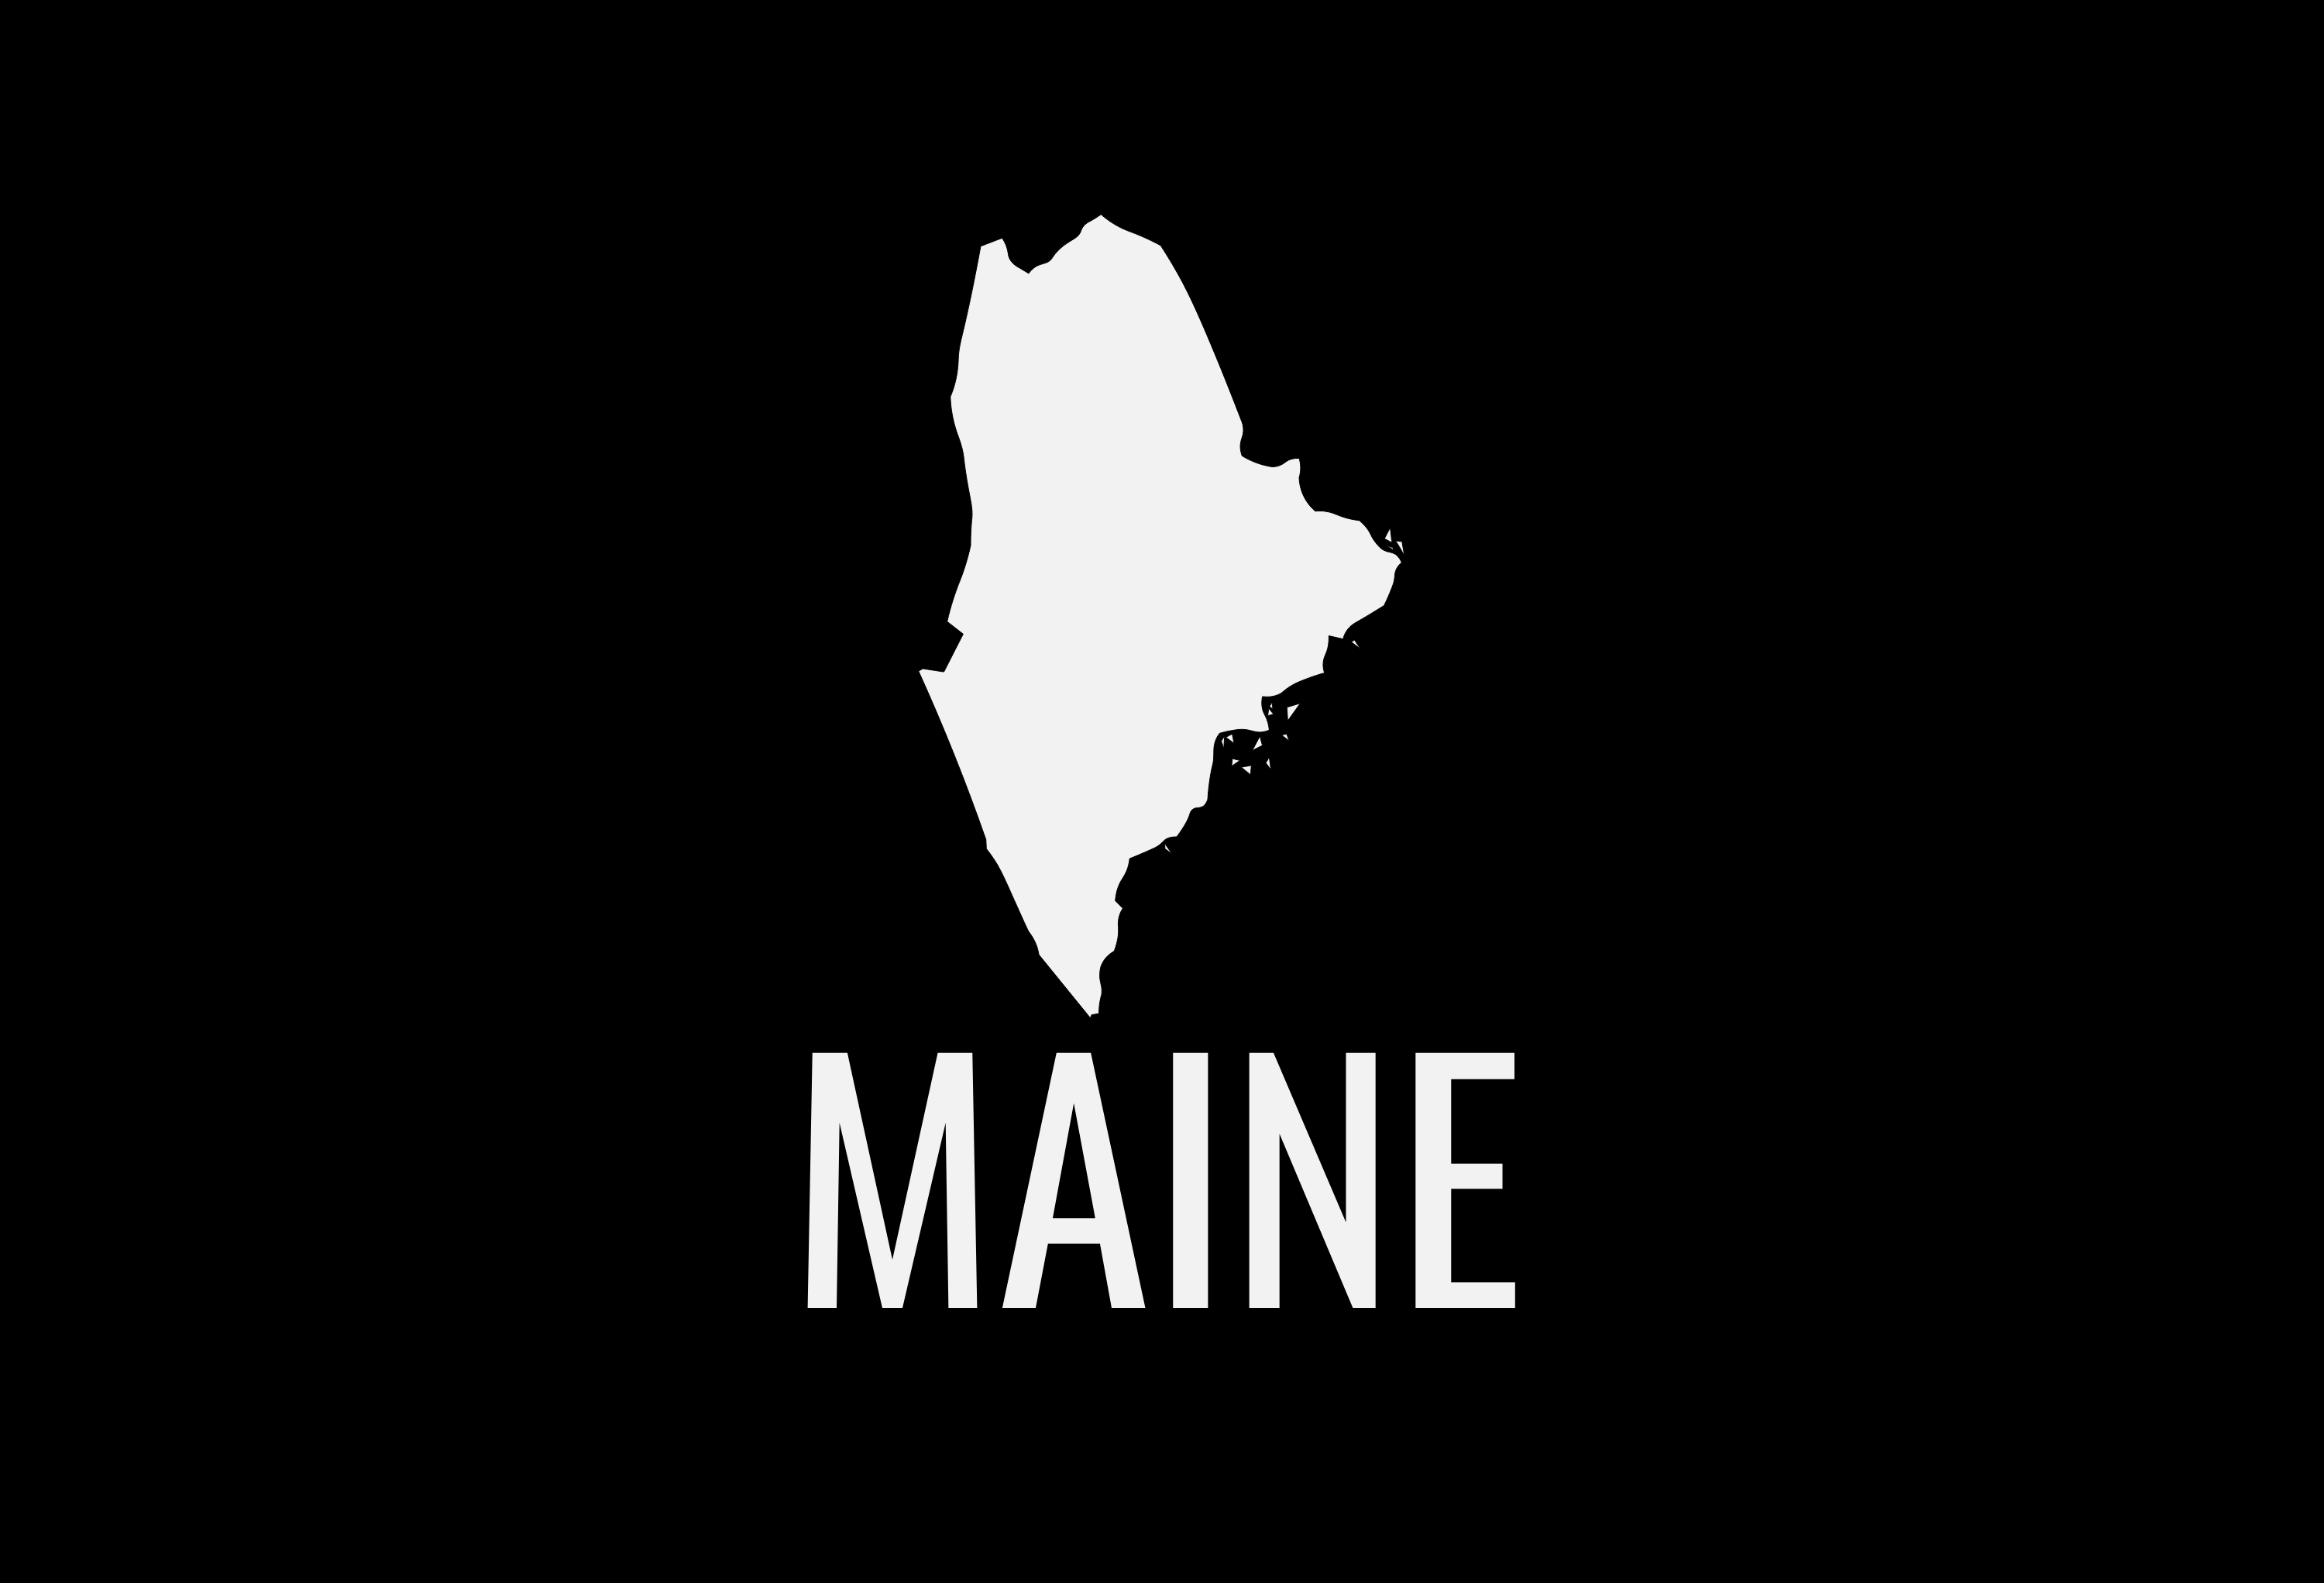 Maine State Map Car Decal - Permanent Vinyl Sticker for Cars, Vehicle, Doors, Windows, Laptop, and more!